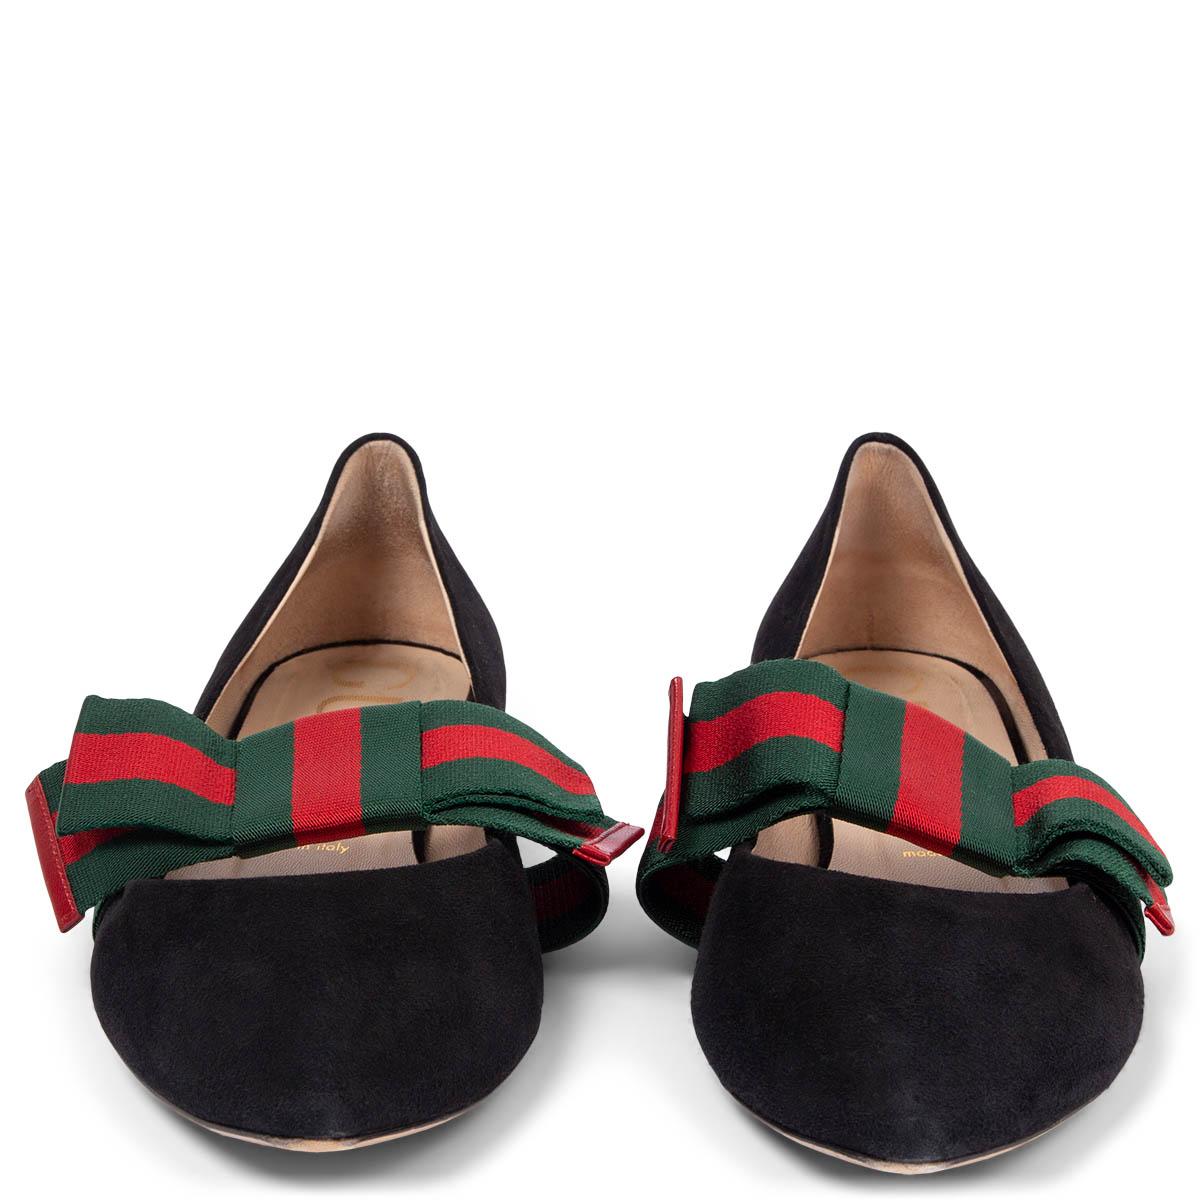 100% authentic Gucci Sylvie Web Bow in black suede leather featuring red and green bow detail. Have been worn and are in excellent condition. Come with dust bags. 

Measurements
Imprinted Size	41
Shoe Size	41
Inside Sole	27.5cm (10.7in)
Width	8.5cm